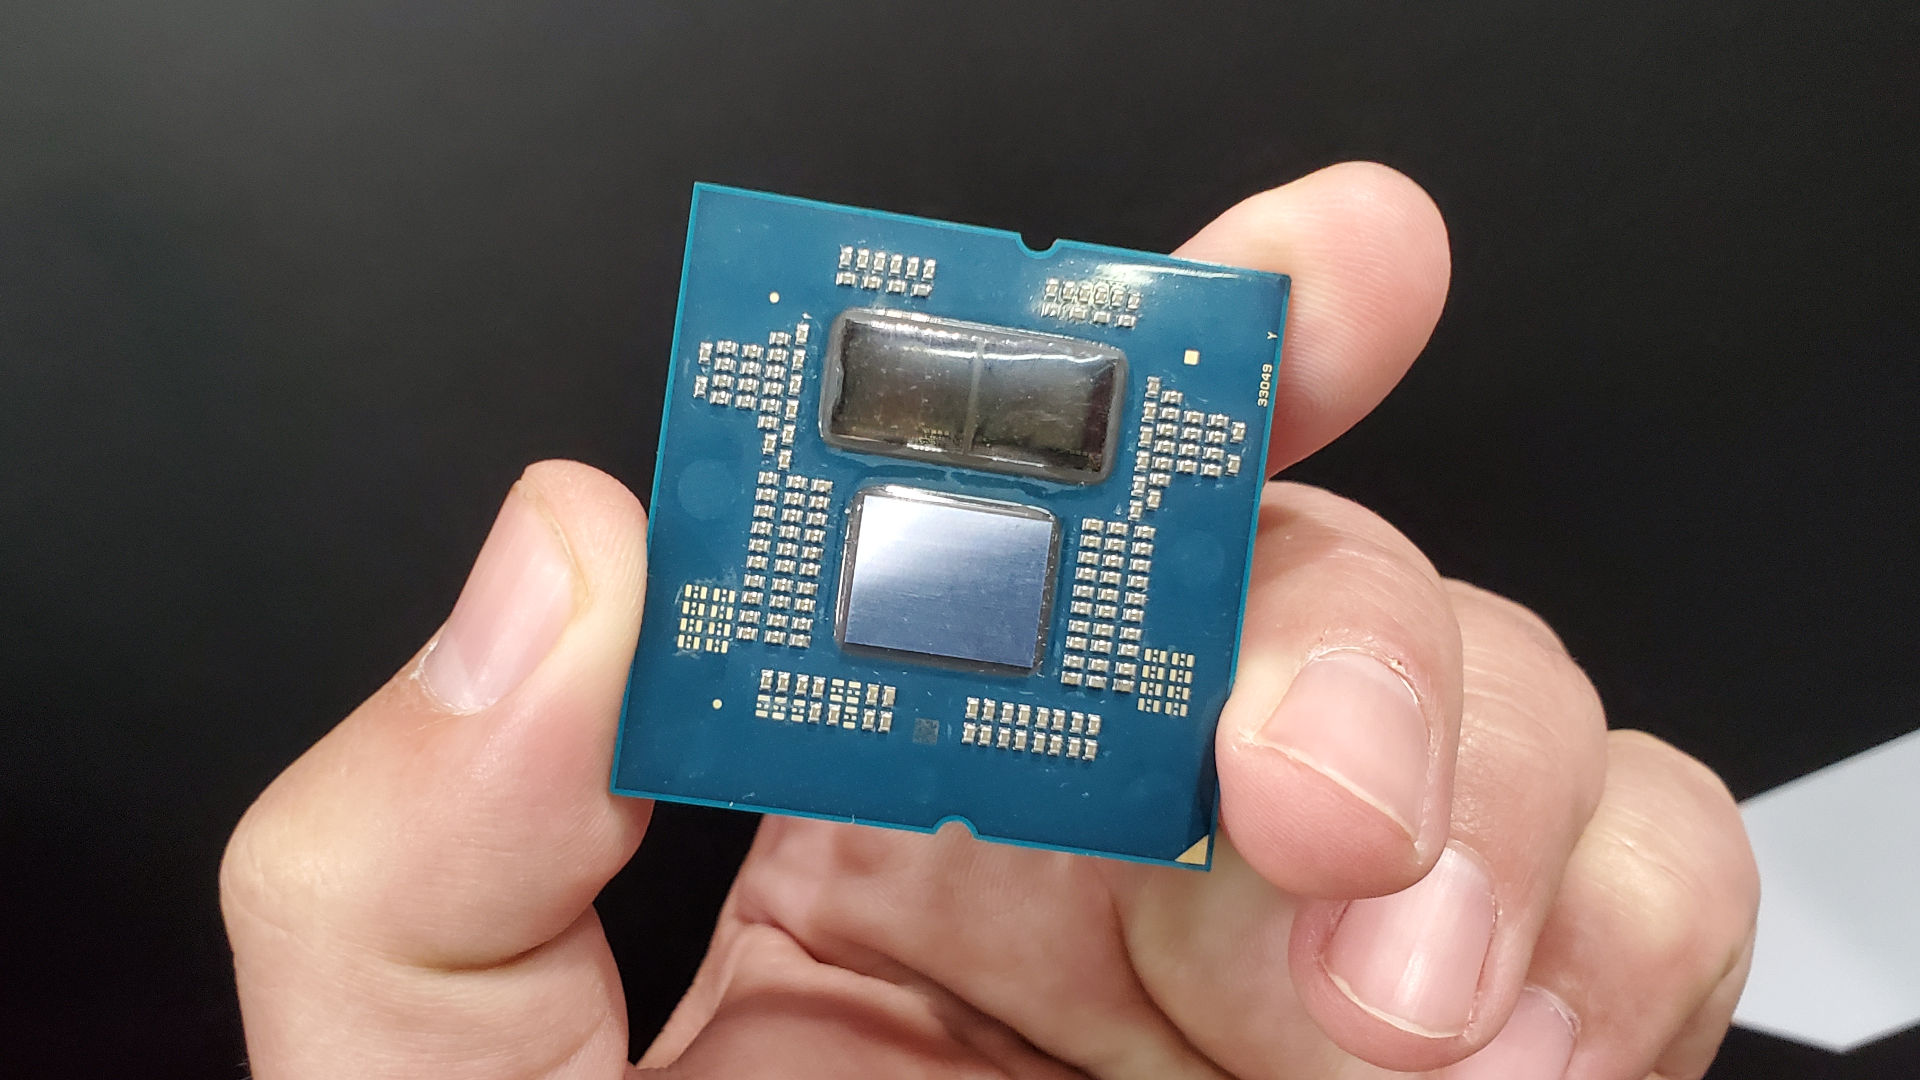 Image of an AMD Ryzen 9000 series processor, with the headspreader removed, held in a hand